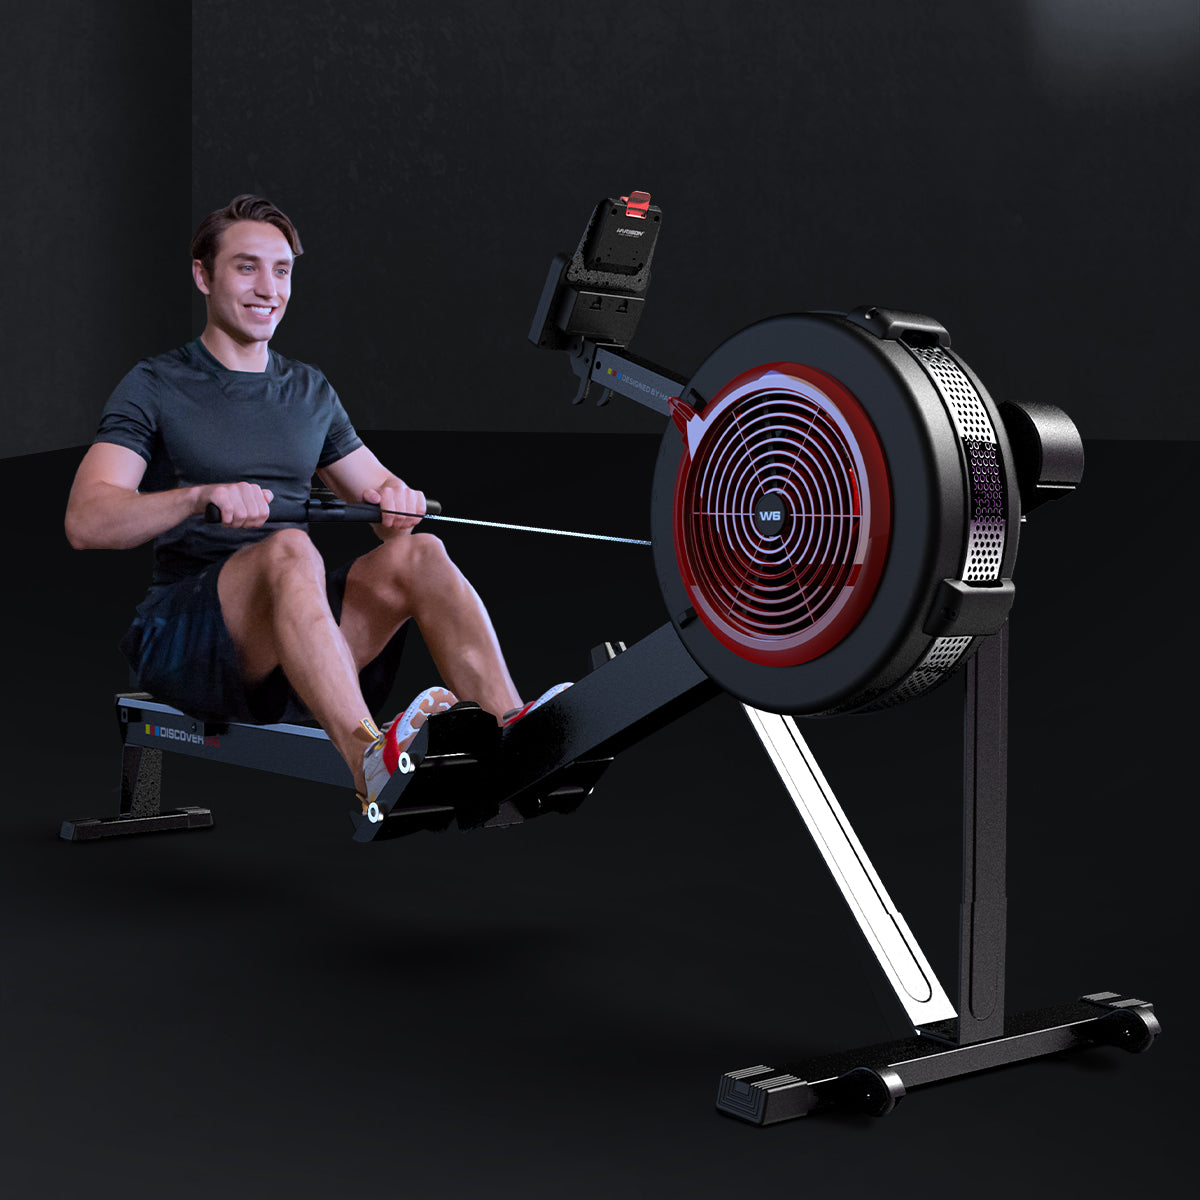 Rowers: Buy Rowers Machine online at Powermax Fitness at discounted price